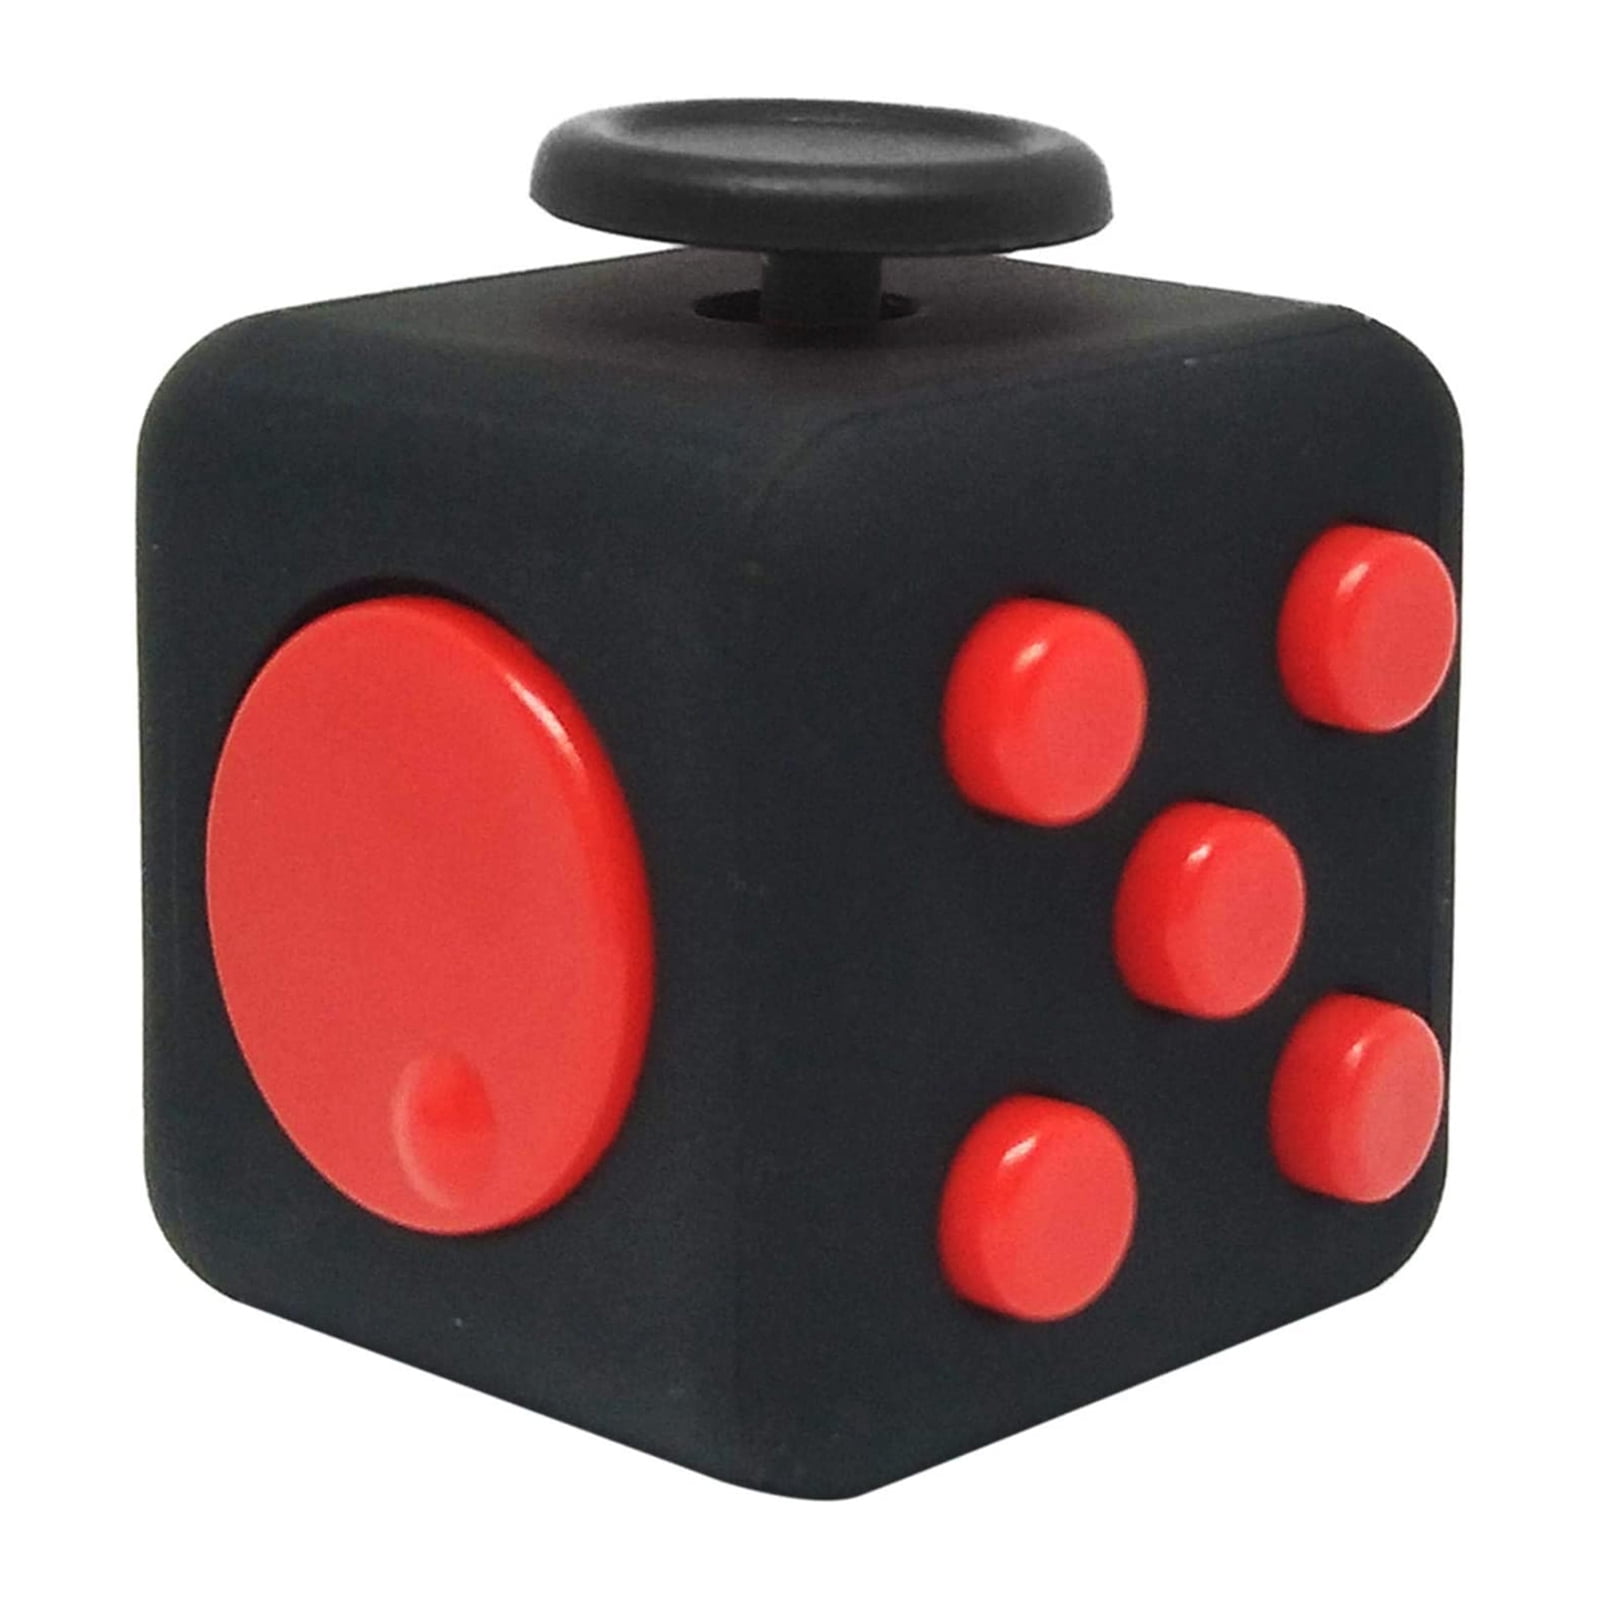 Finger Sensory DE Fidget Anxiety Cube for ADHD Mini Dice Stress Relief Toy 